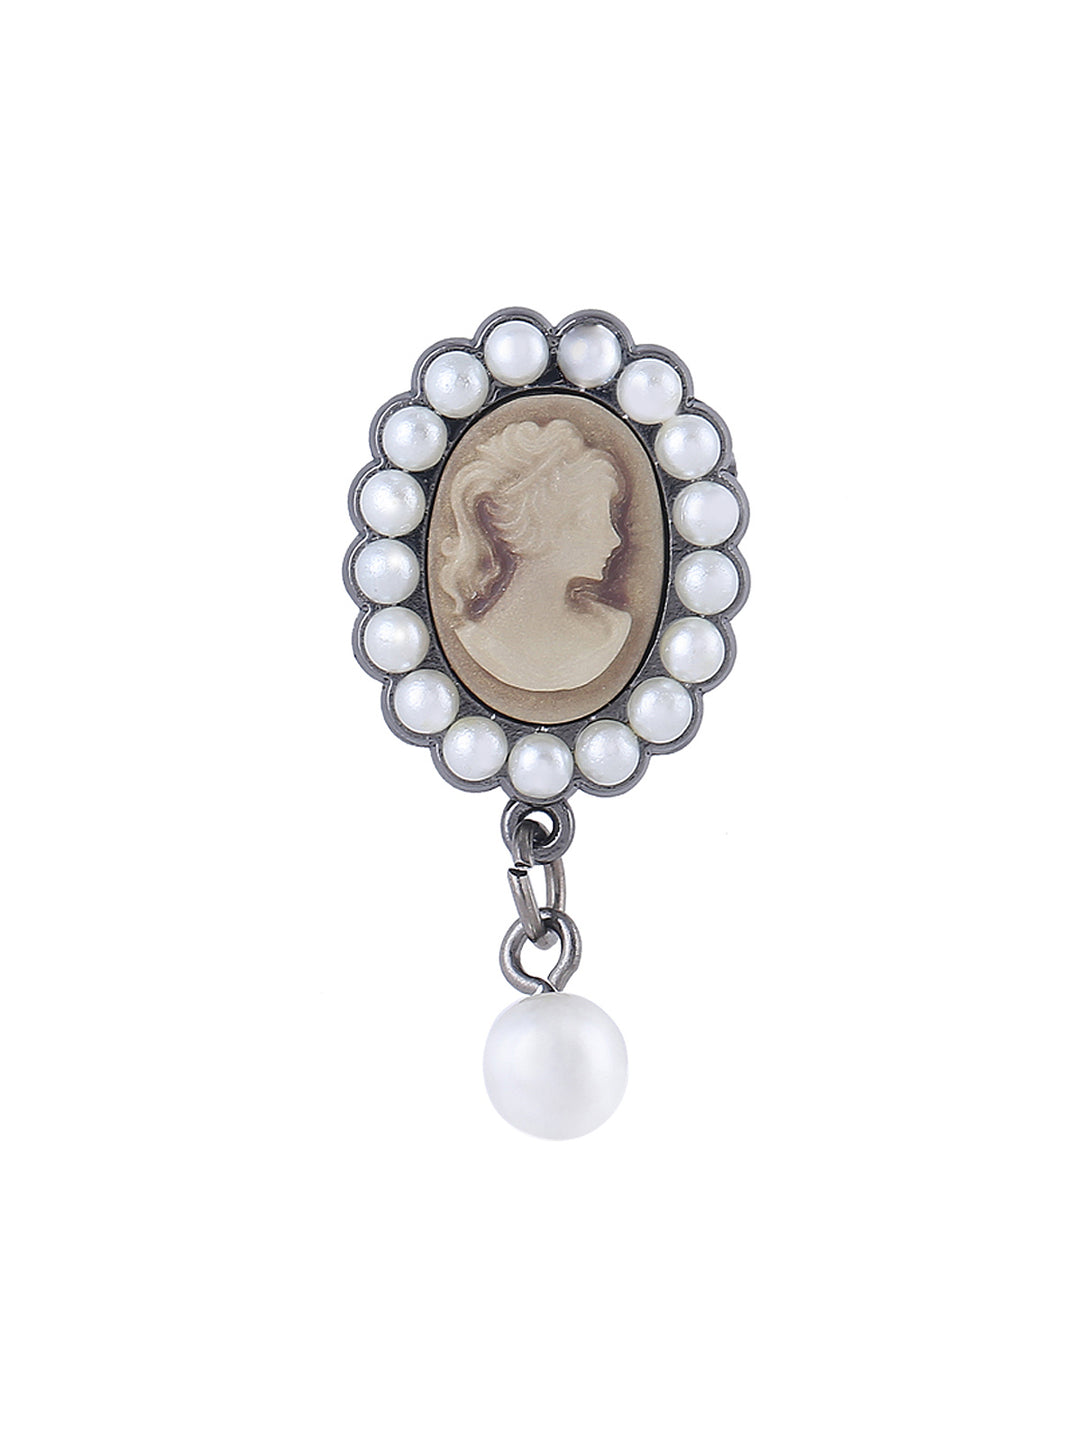 Vintage Lady Cameo Pearl Brooch Pin